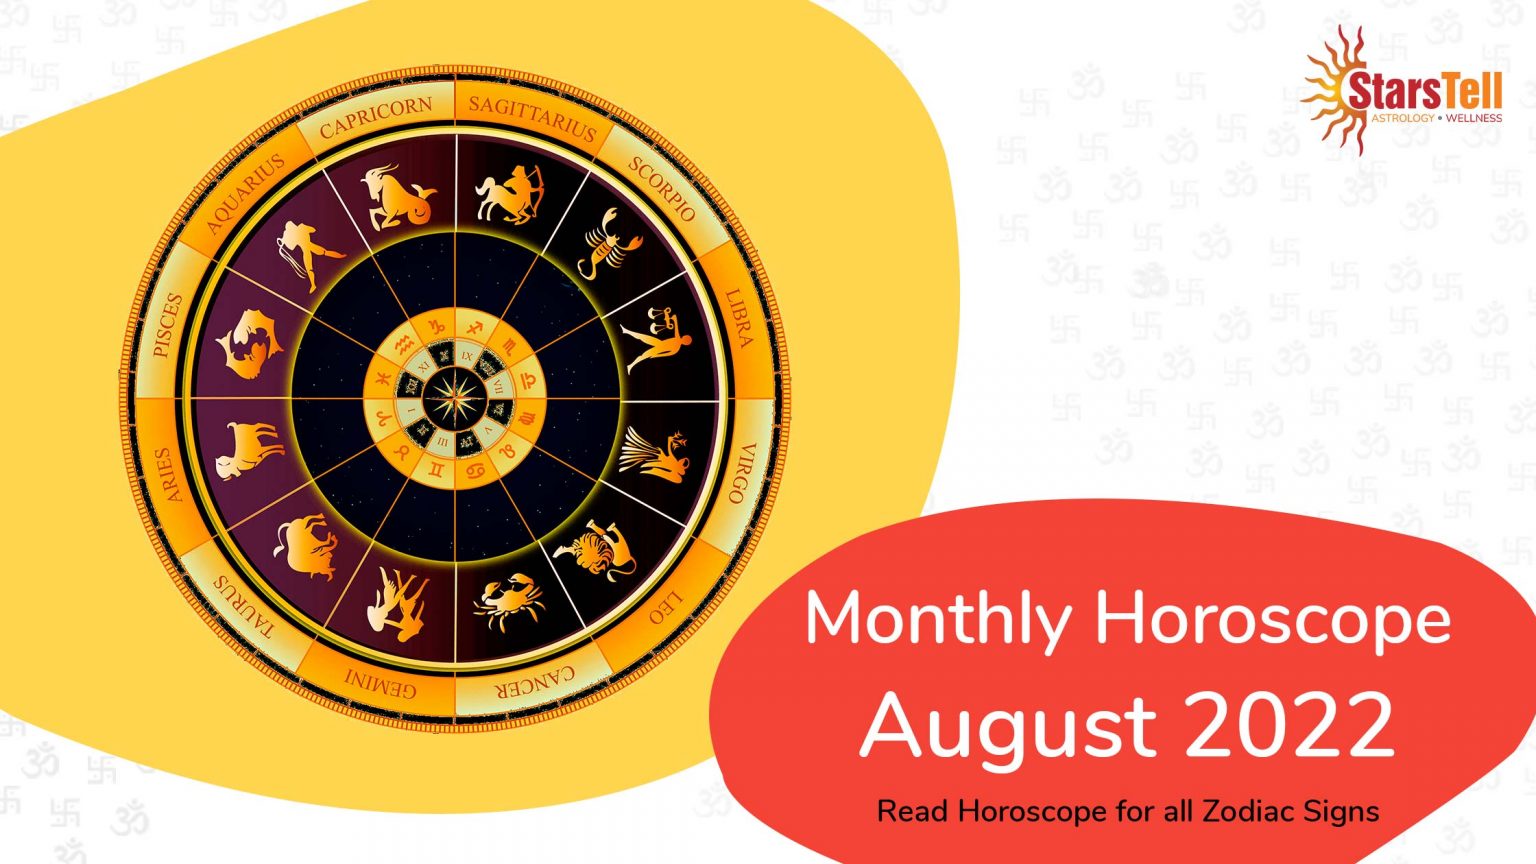 Monthly Horoscope August 2022 Read Horoscope for all zodiac signs